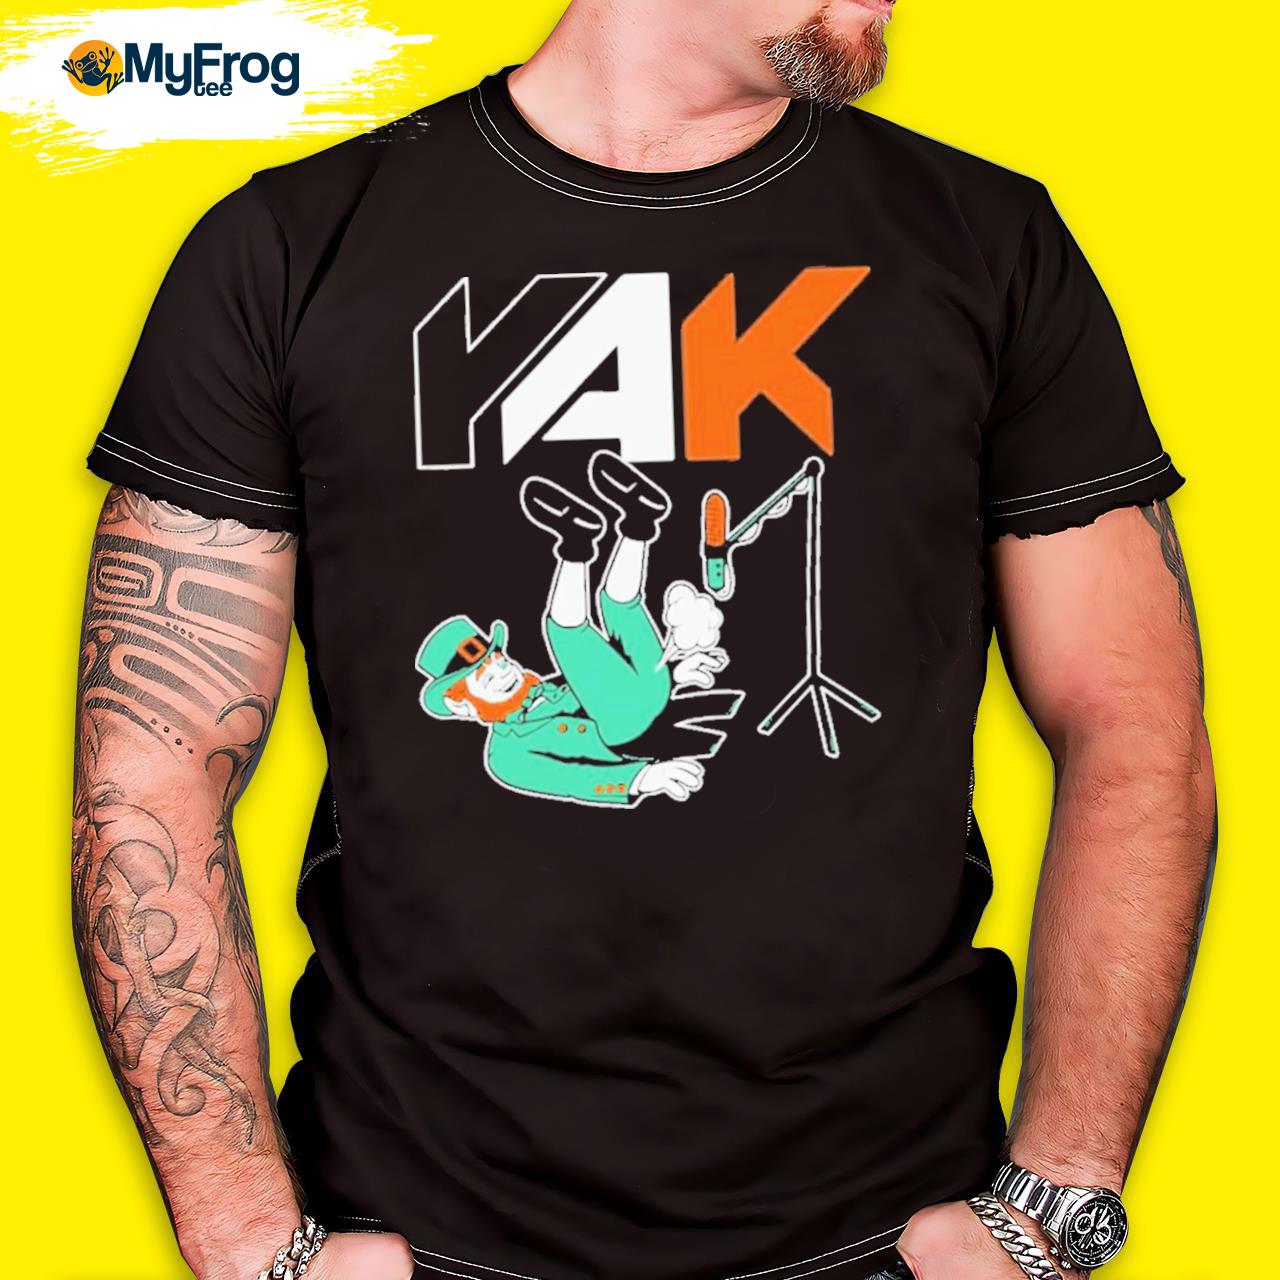 The Yak St. Patrick’s Day T Shirt